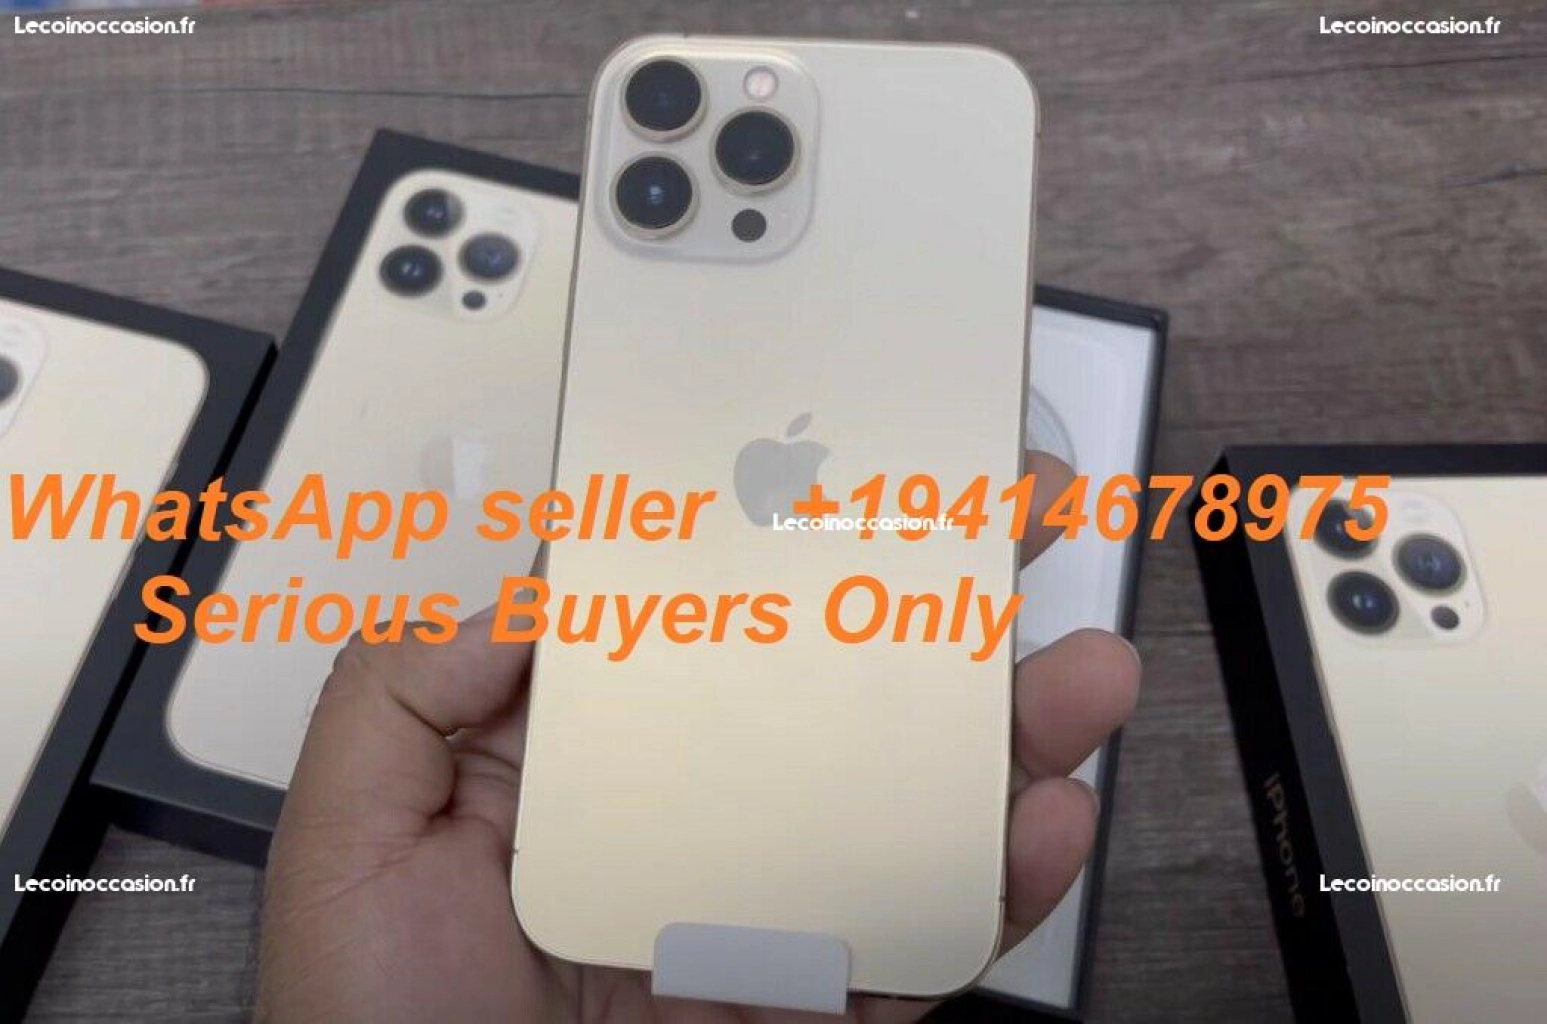 selling new Apple iPhone 13 Pro Max 12 Pro 11 Pro Samsung Ultra 5G PS5 PS4 PRO